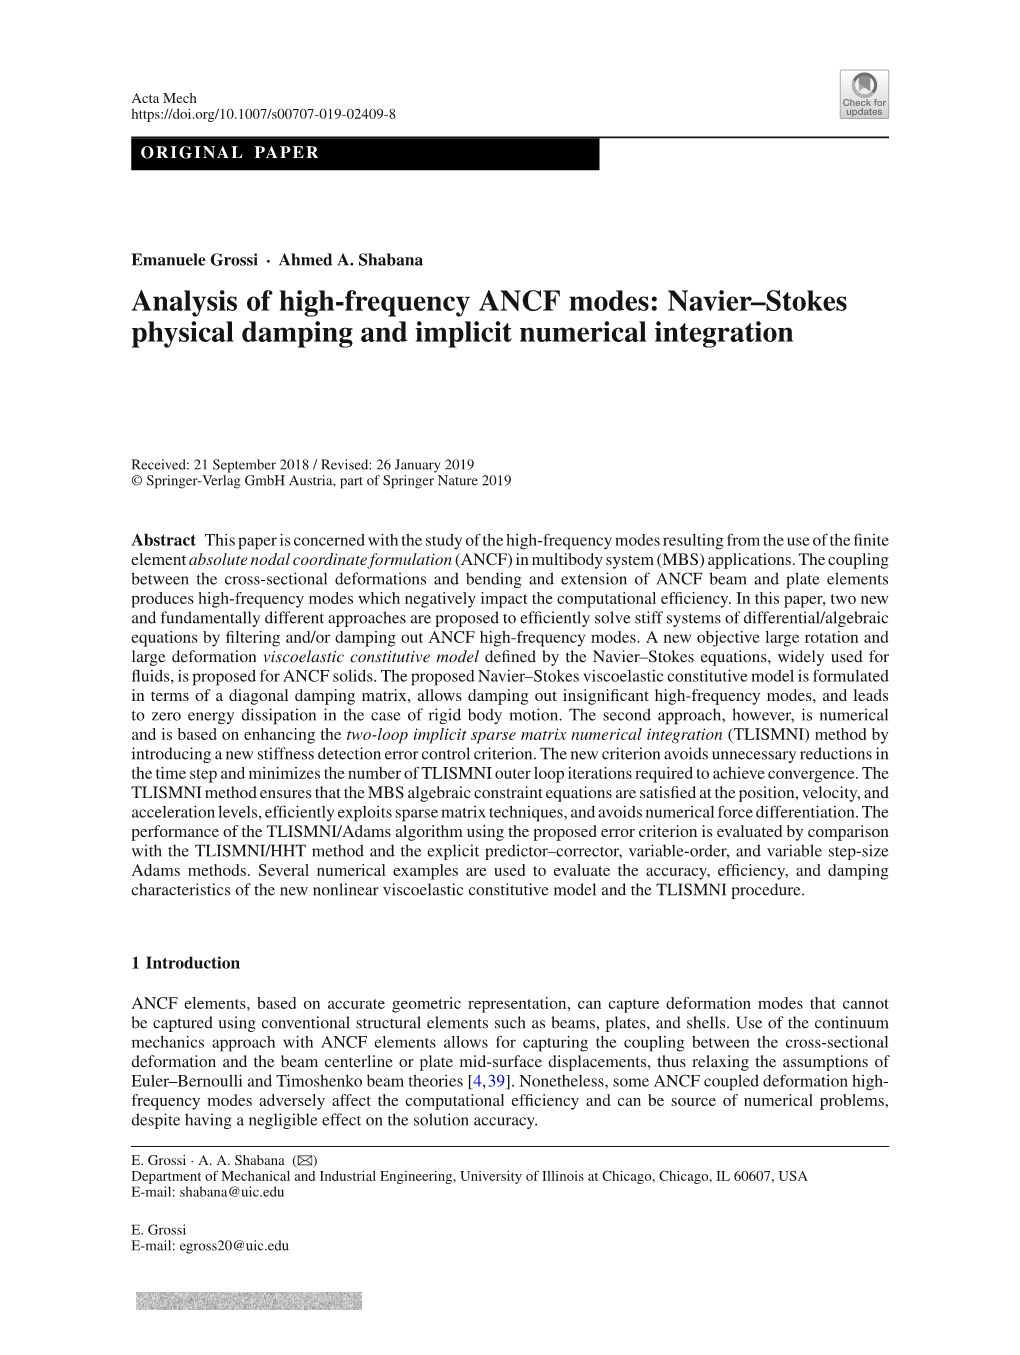 Navier–Stokes Physical Damping and Implicit Numerical Integration